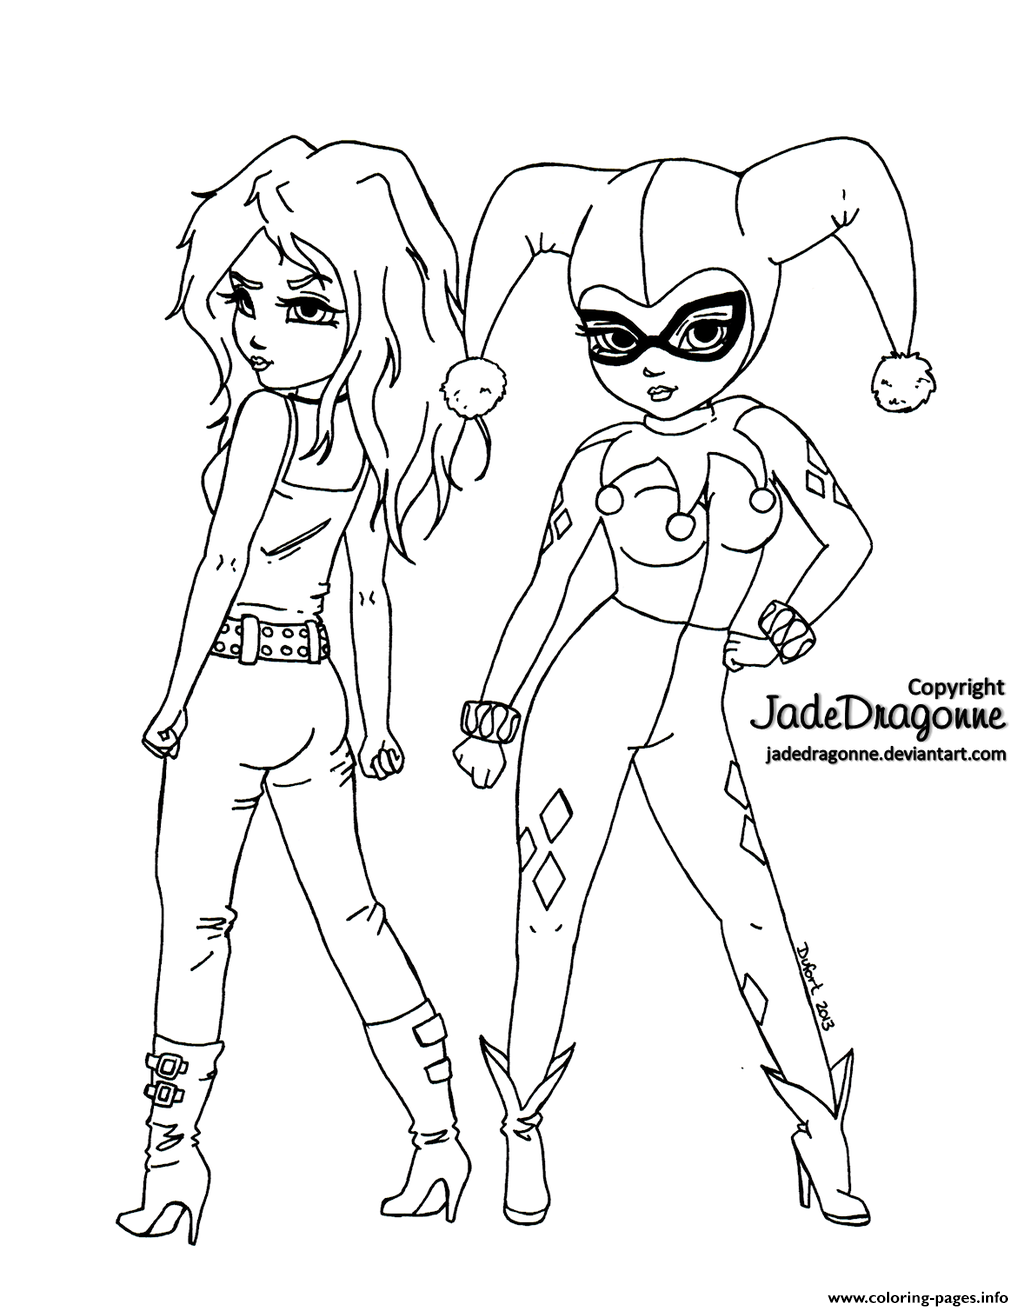 Two Girls Harley Quinn coloring pages